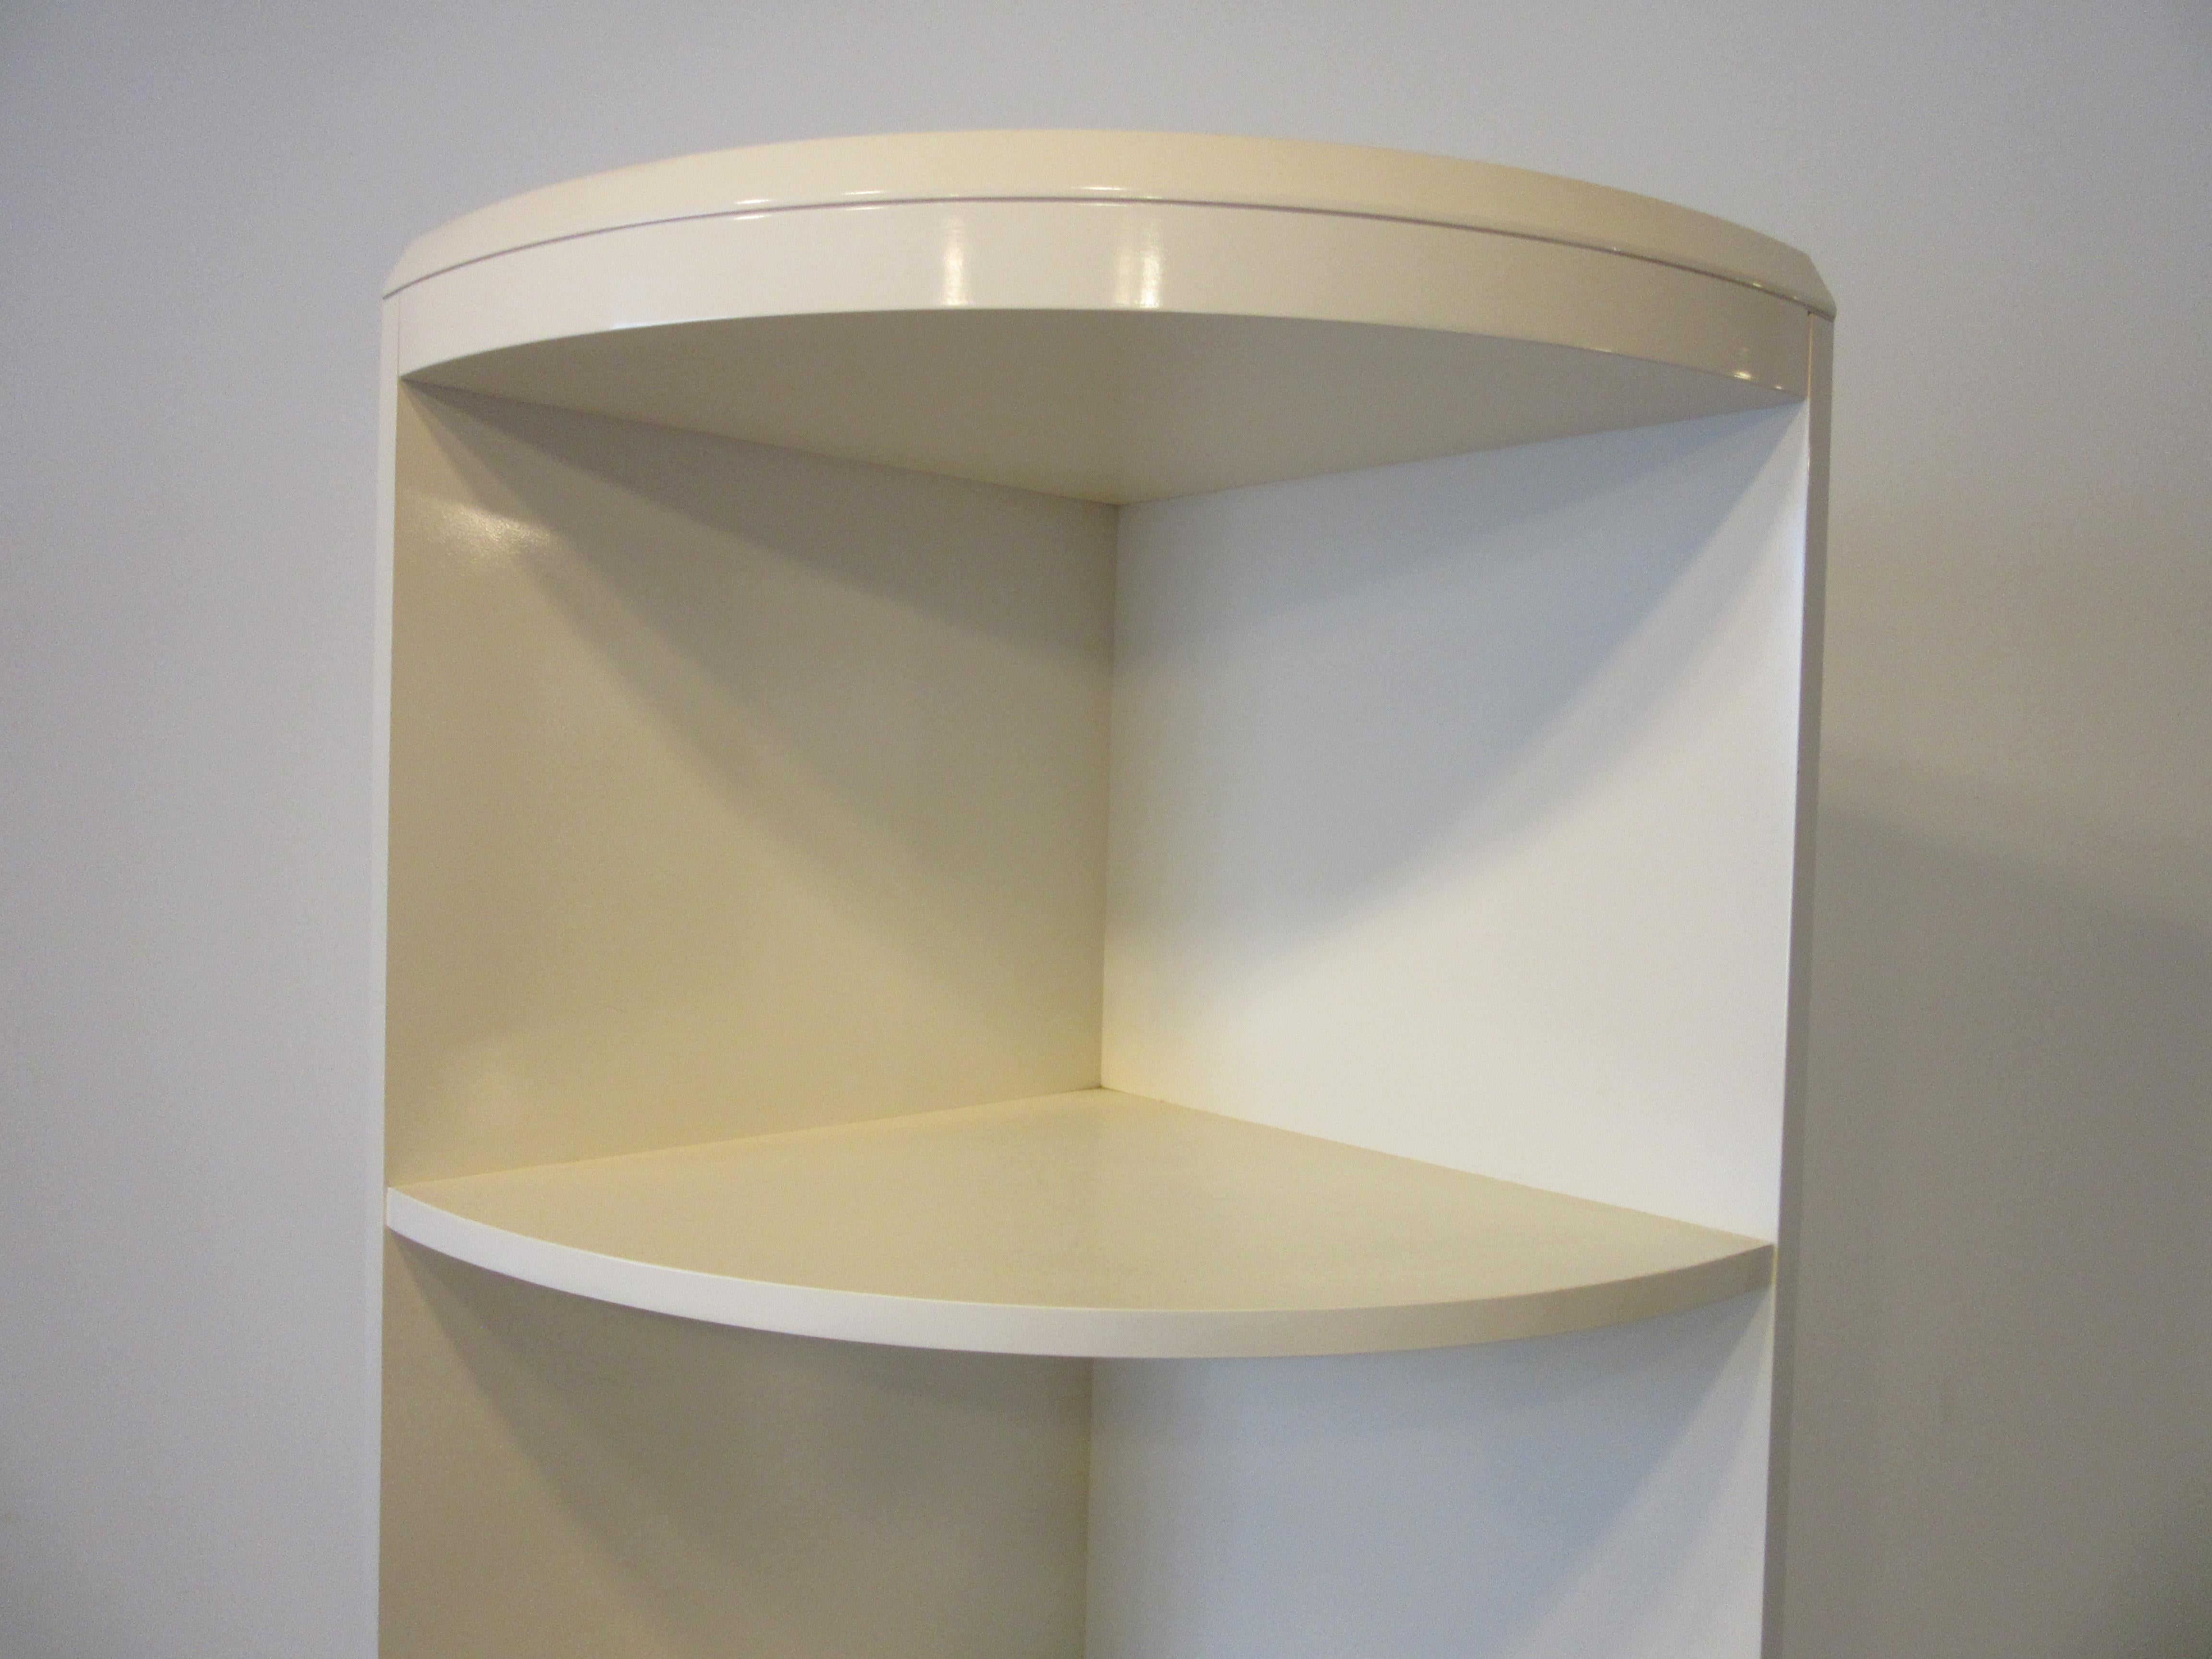 A pair of free standing radius corner bookcase / shelfs with five cubby boxes finished in a creamy white lacquerer having a finished tapered top and a kick to the bottom . Designed in the manner of Karl Springer and perfect to use as extra storage